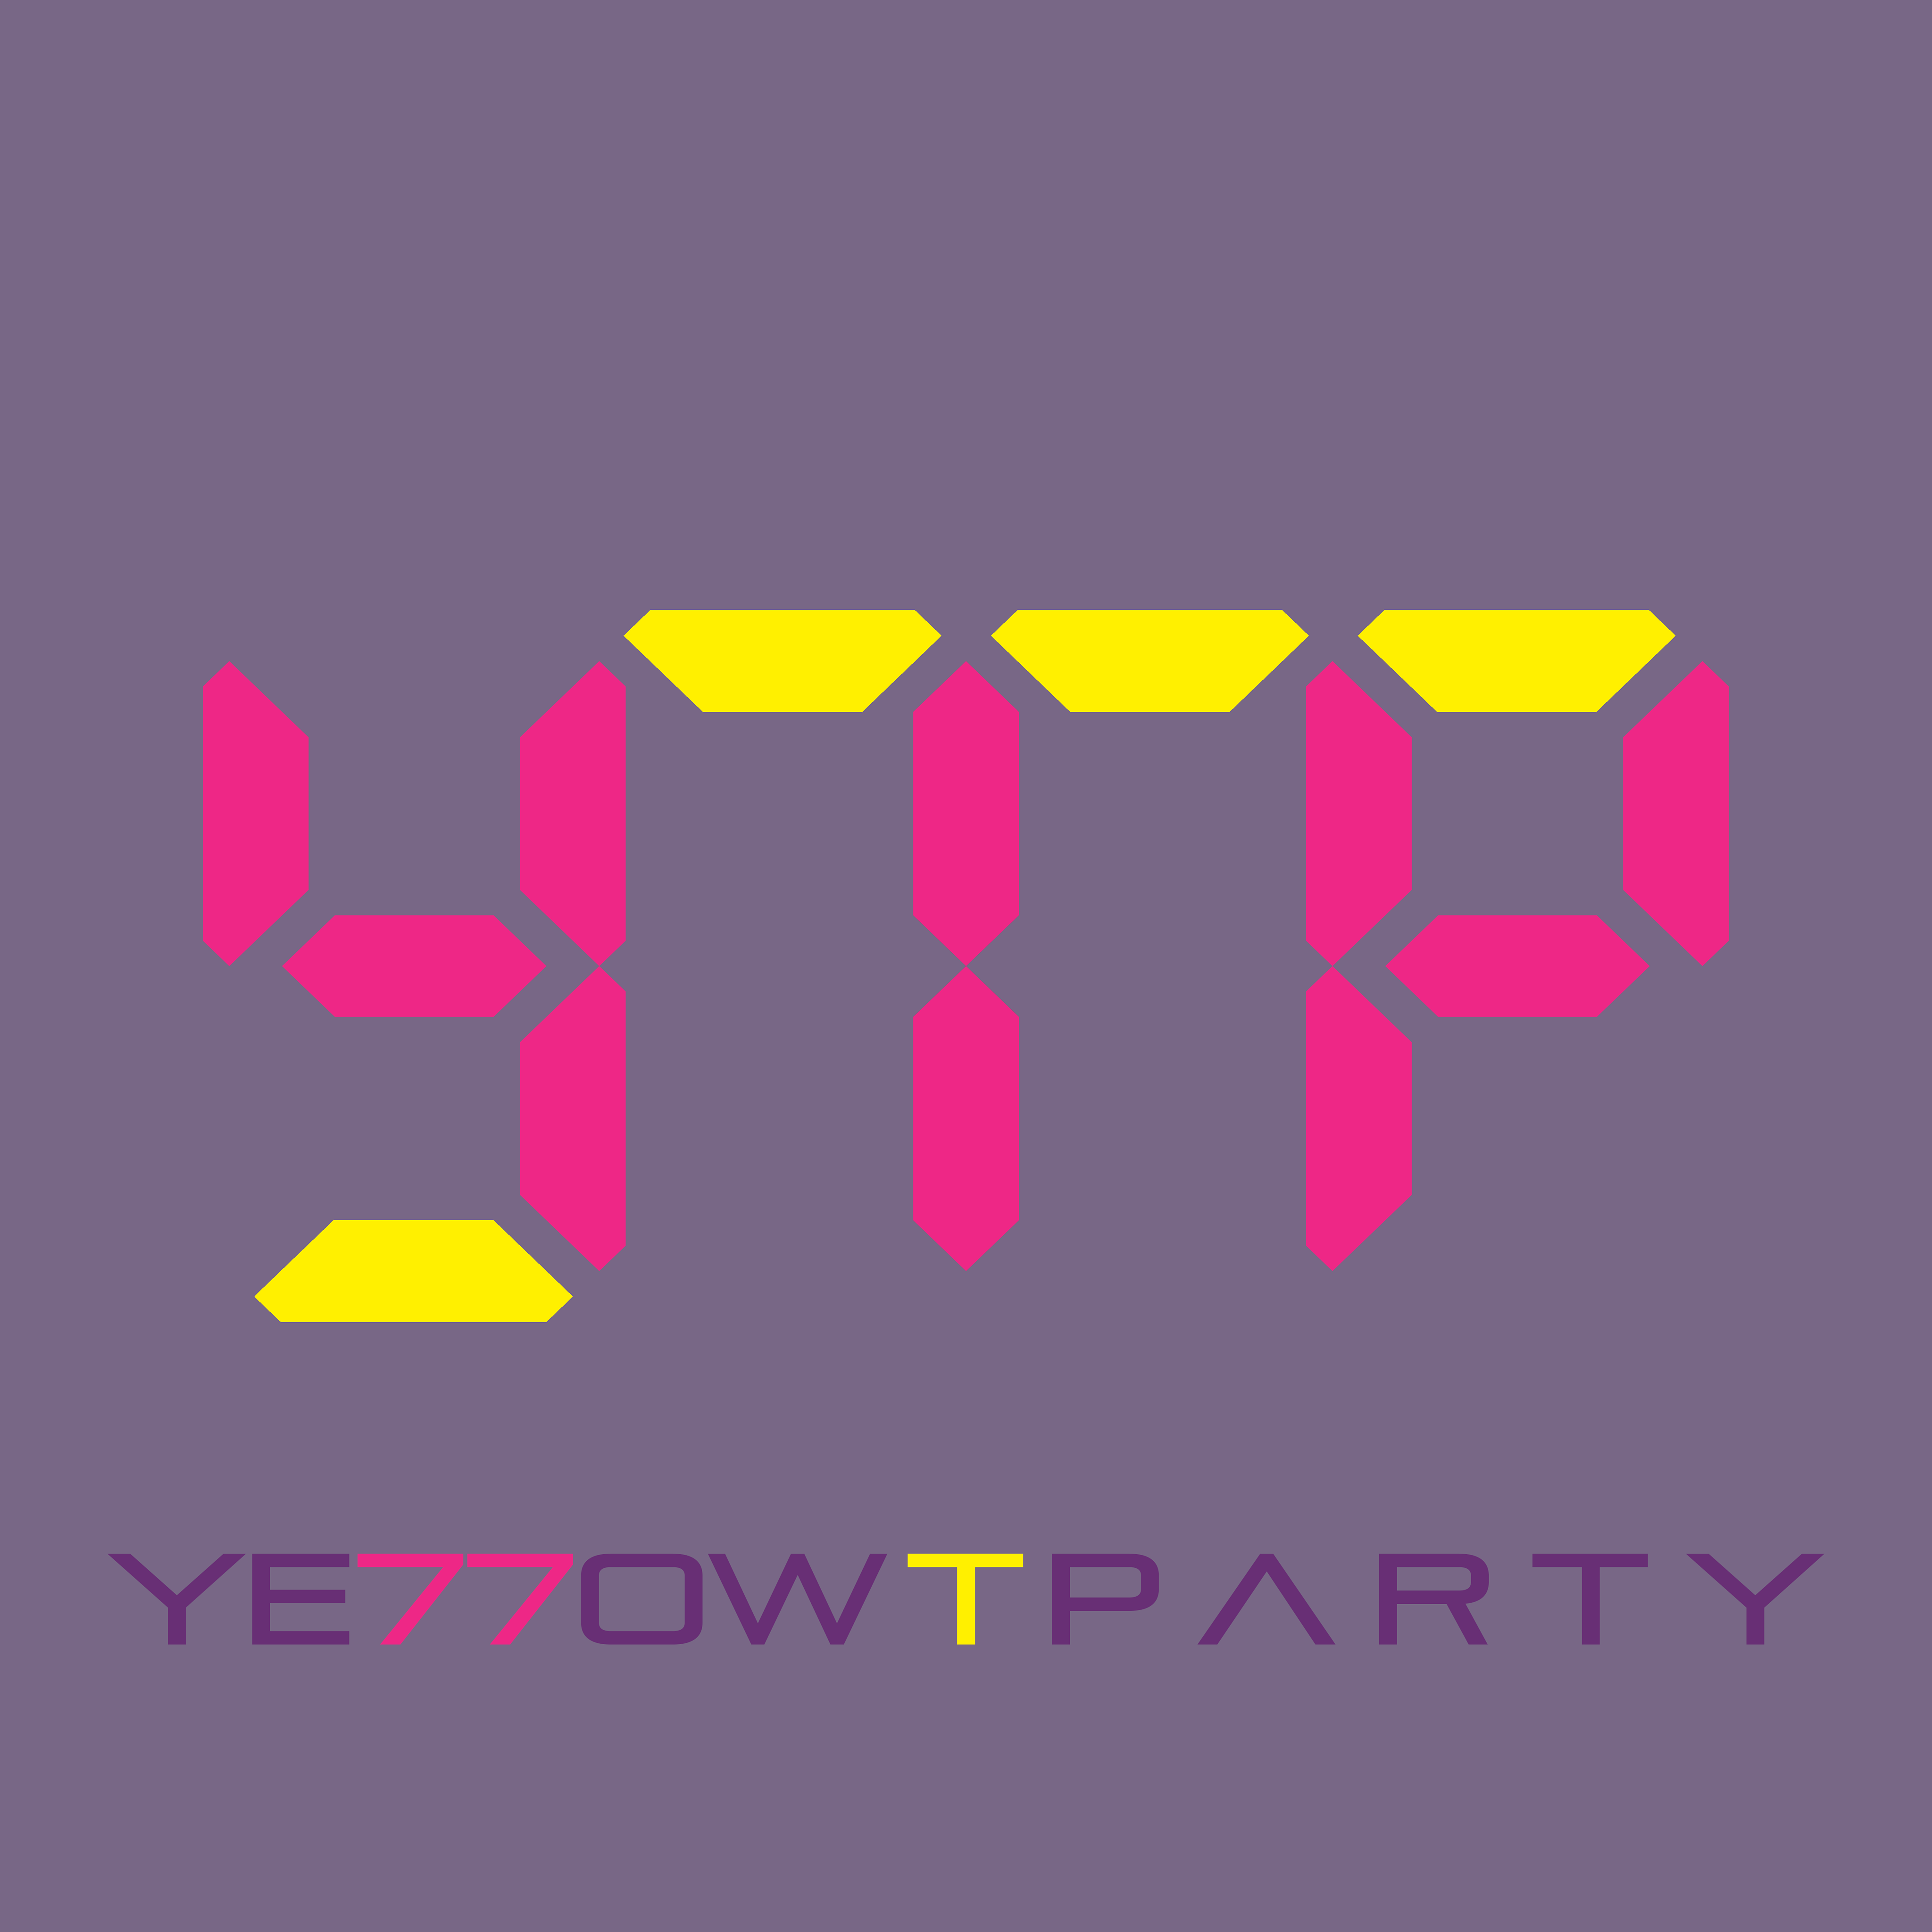 Ye77ow T Party